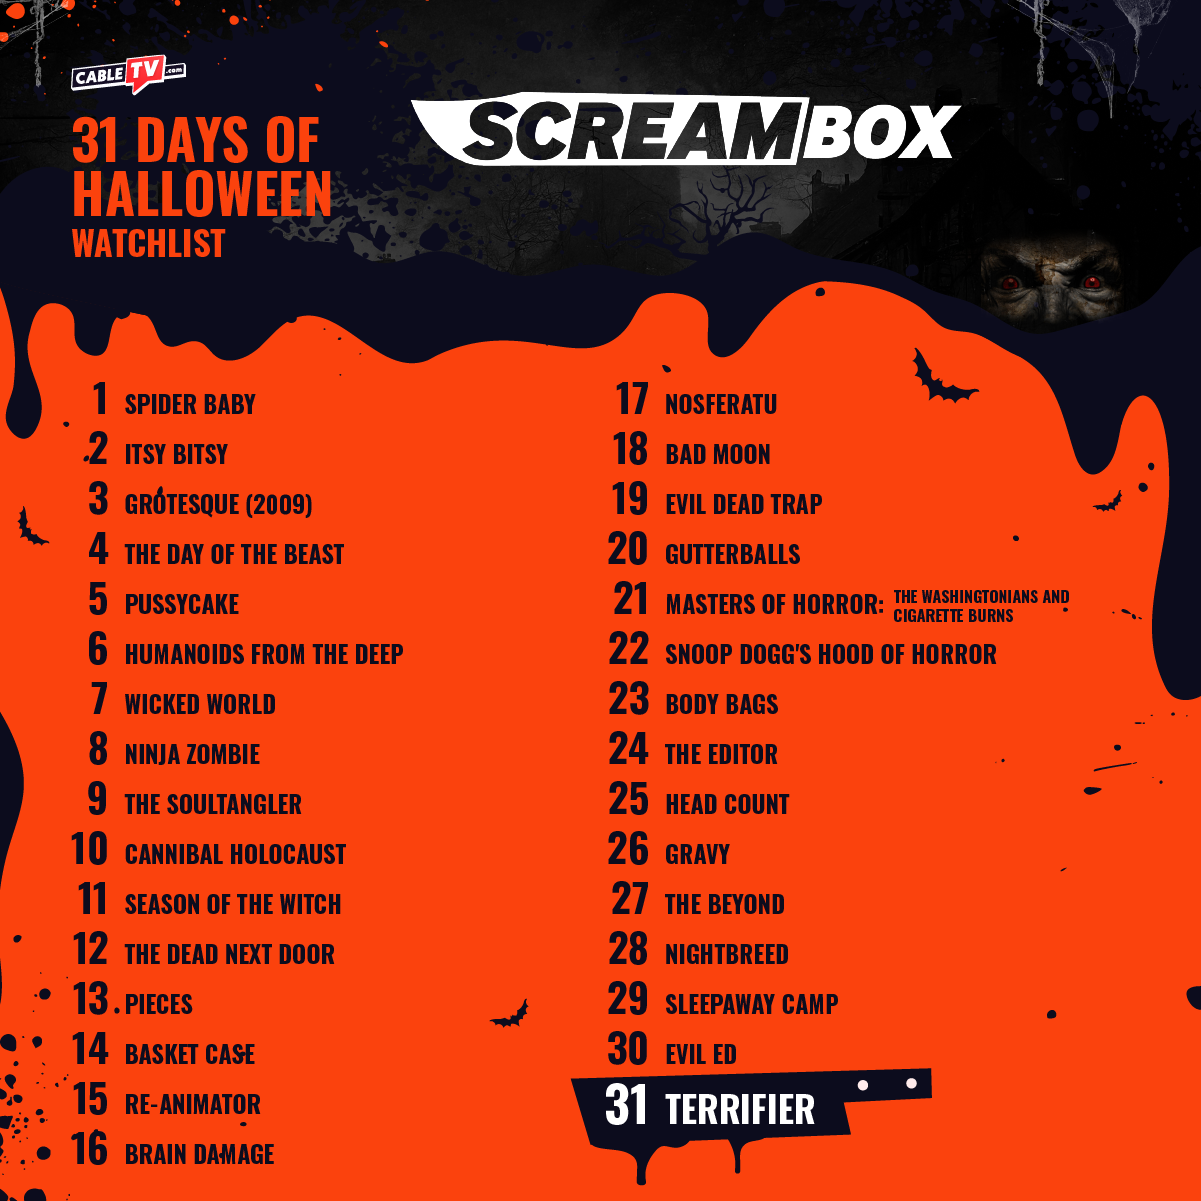 31 days of horror movie recommendations for Screambox.